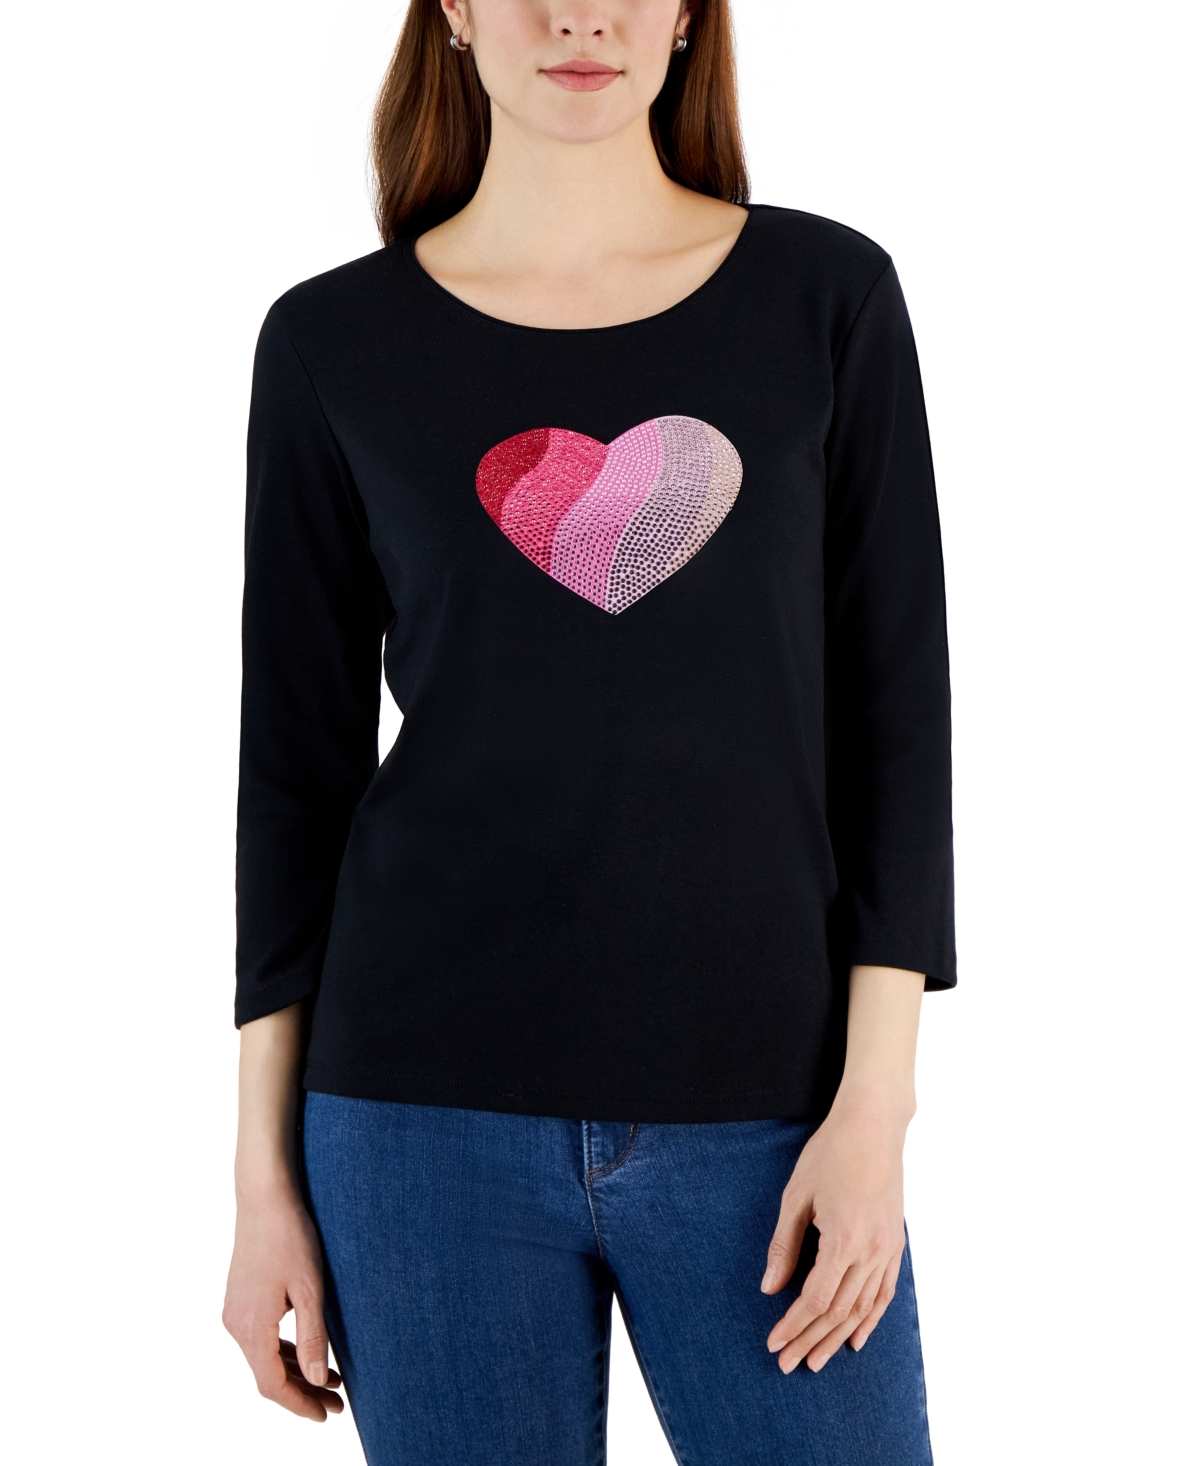 Women's Gem Heart Graphic Pullover Top, Created for Macy's - Bright White